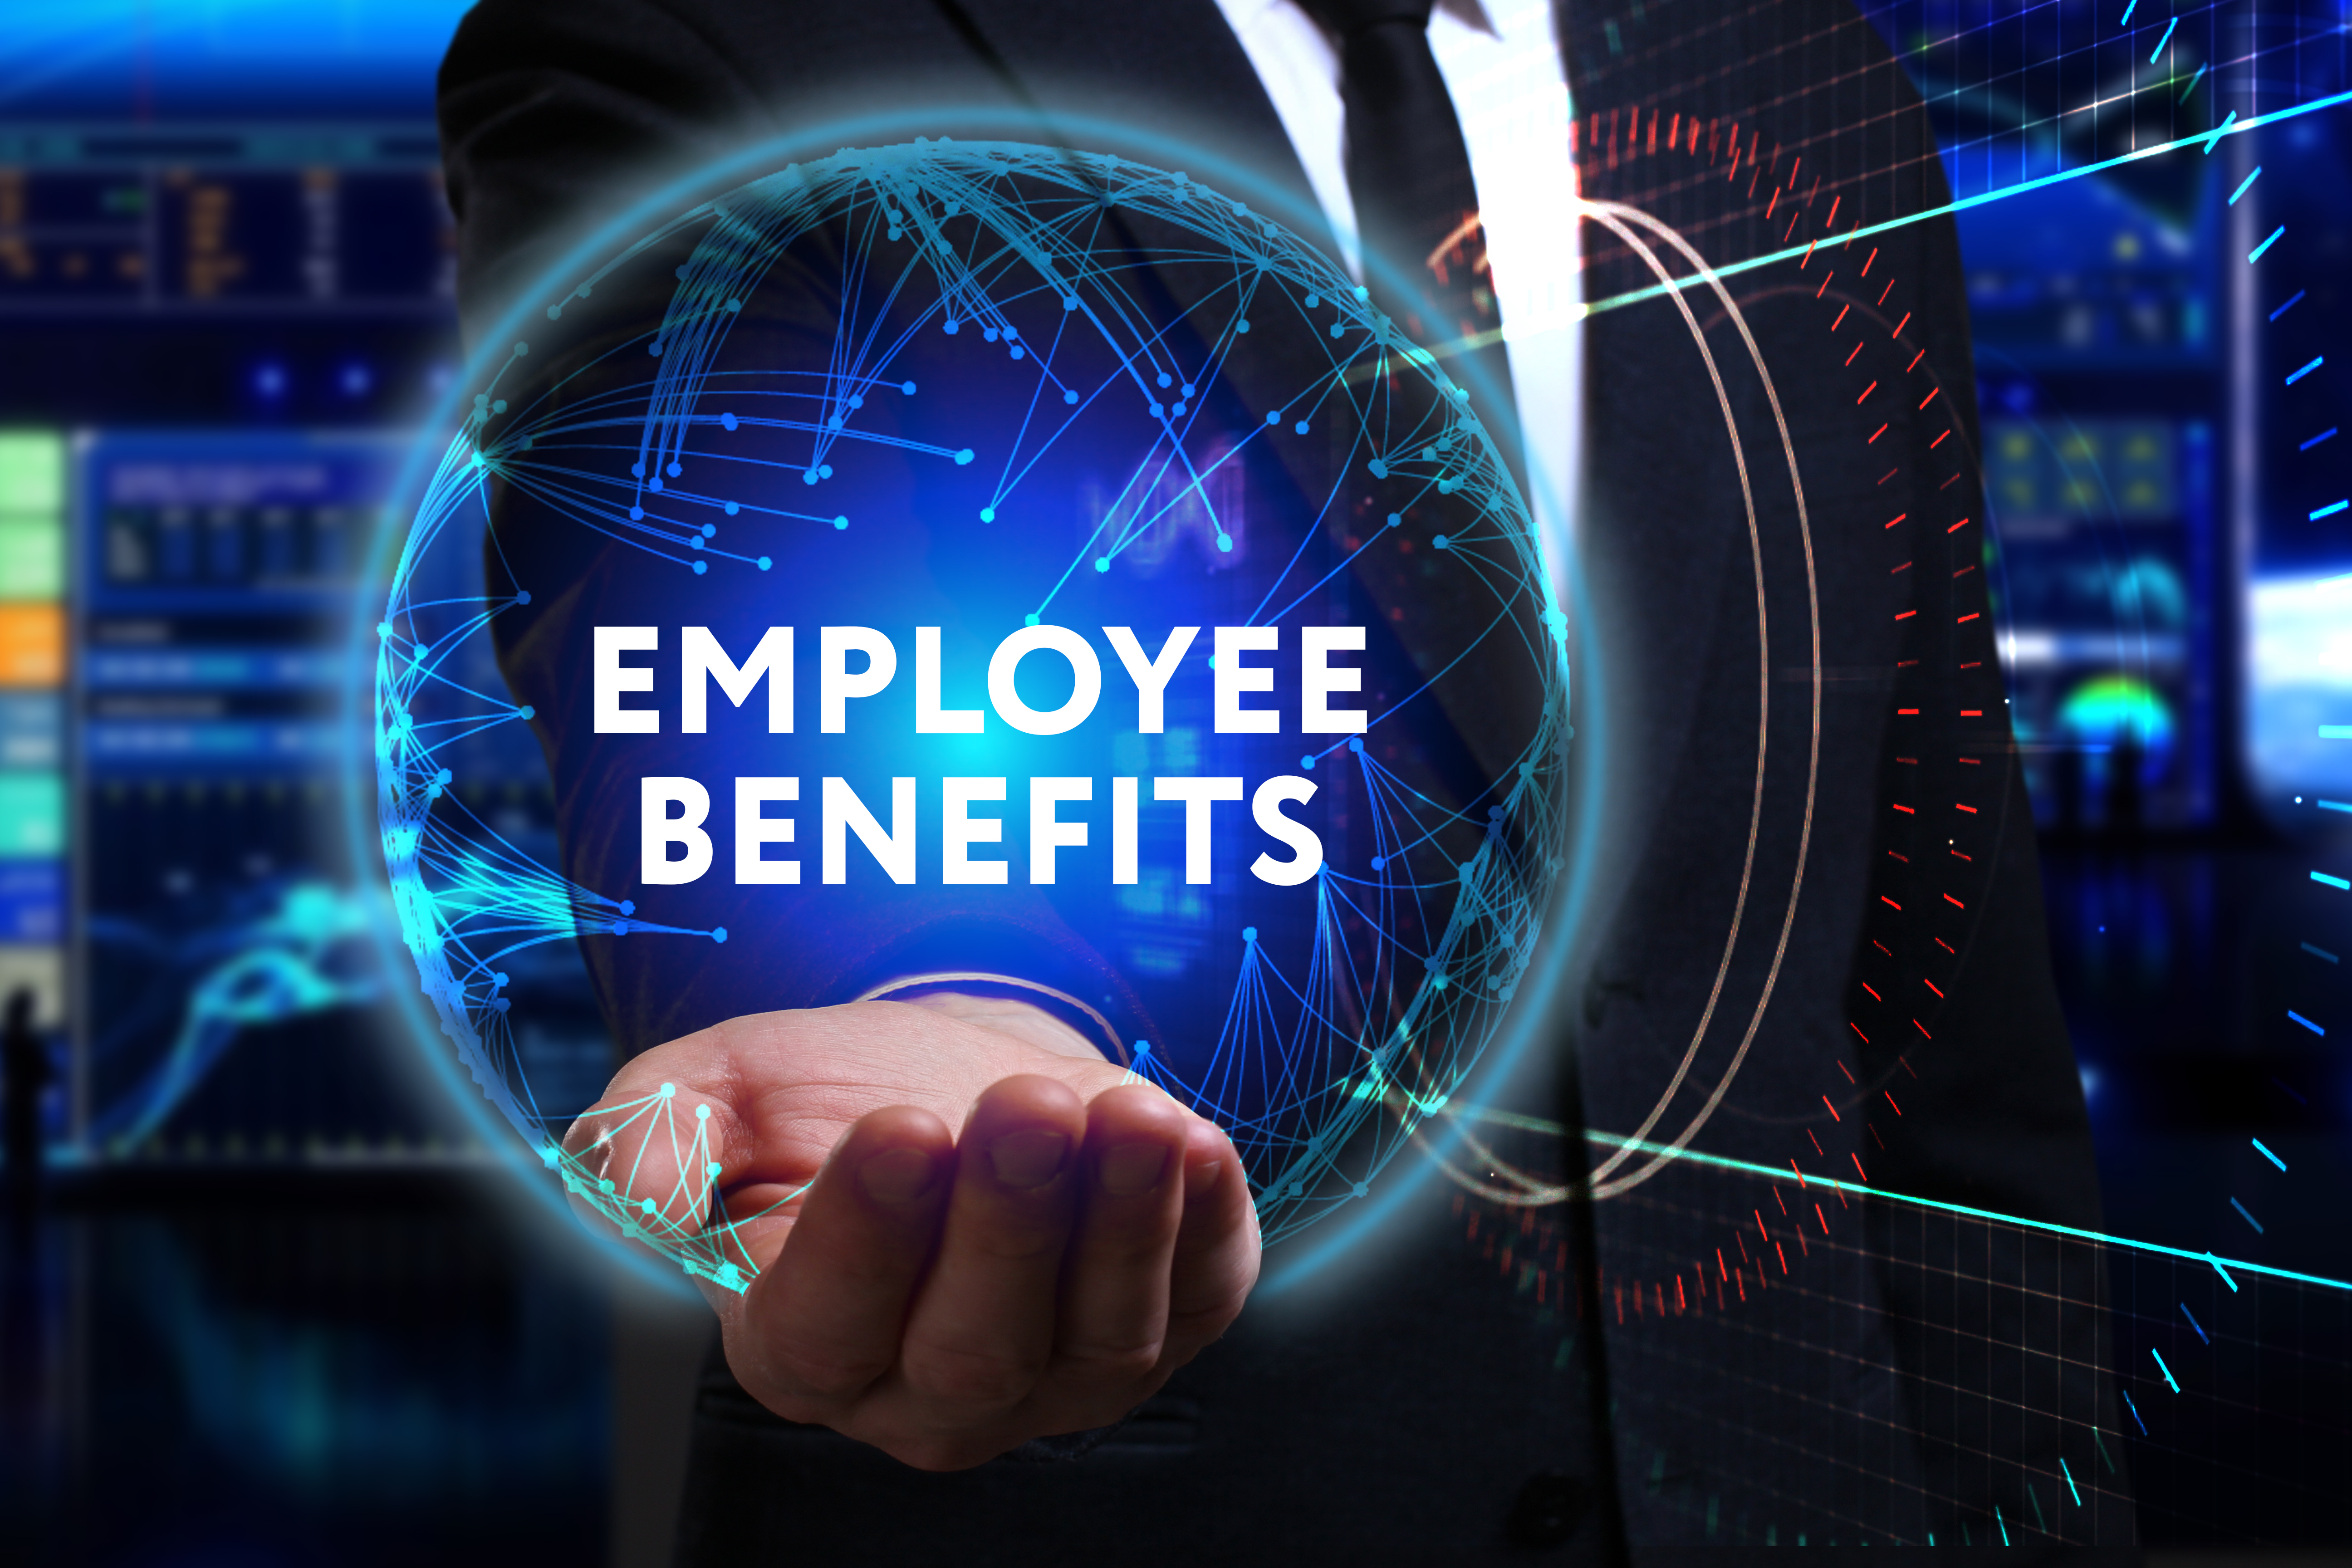 An employee benefits package that people actually want!